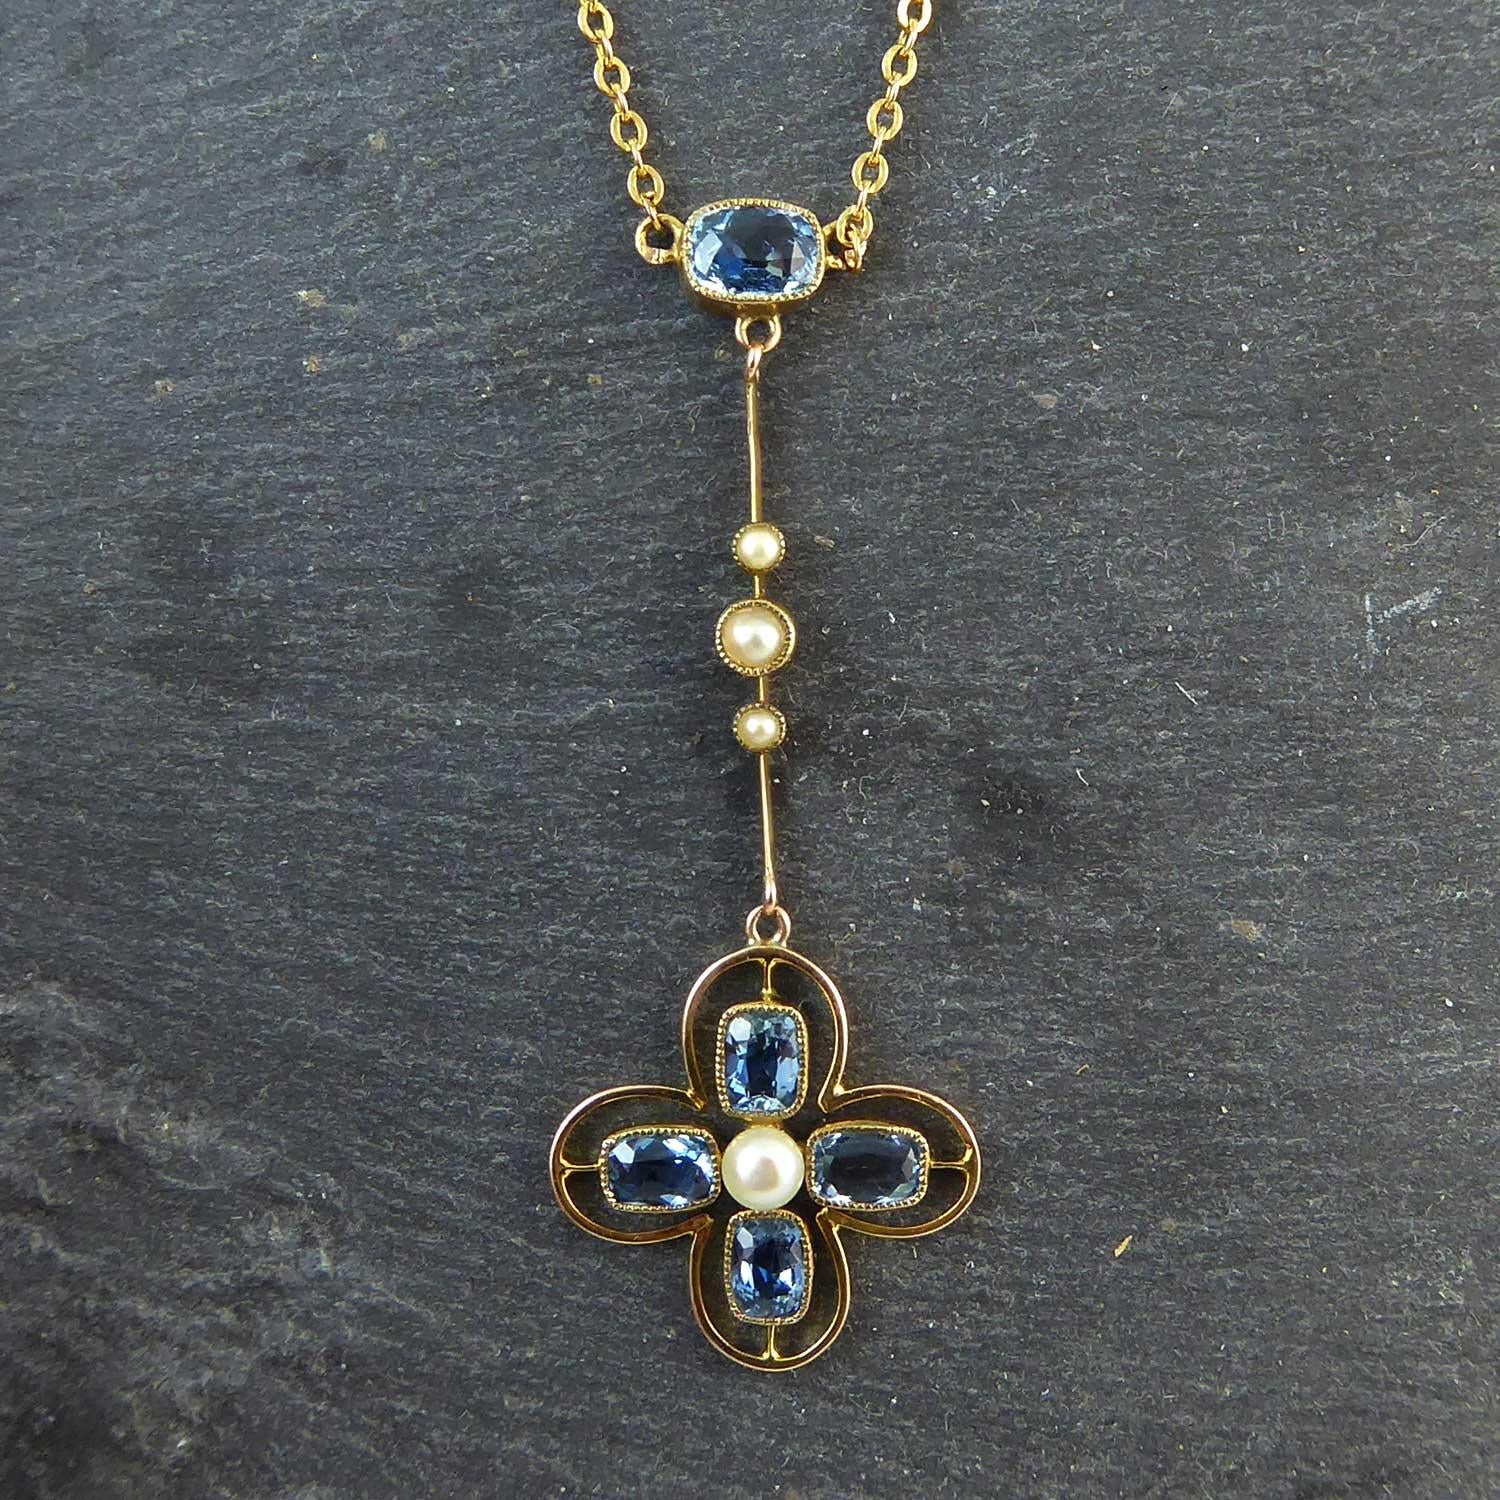 Antique Late Edwardian Necklace, Aquamarine and Pearl, circa 1910 1